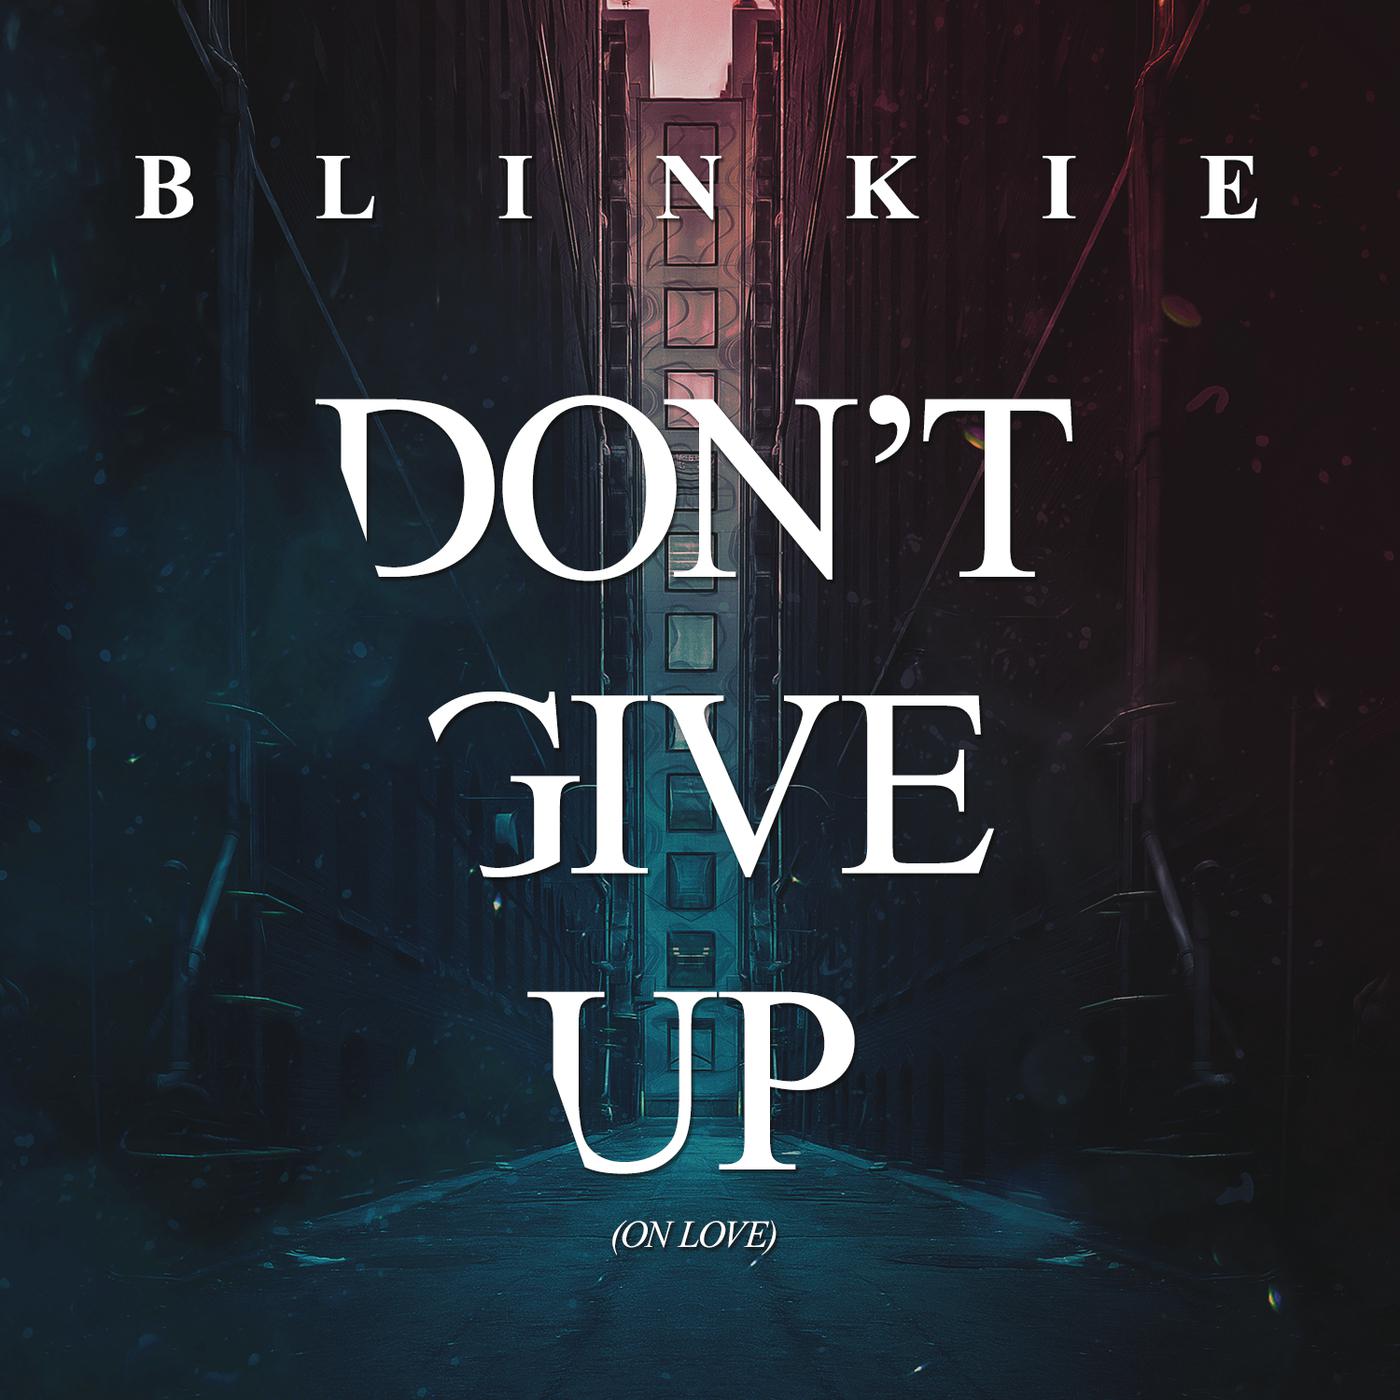 Донт гив ап. Don`t give up. Don't give up картинка. Don`t give up текст. Blinkie feat Alahna-don't give up.